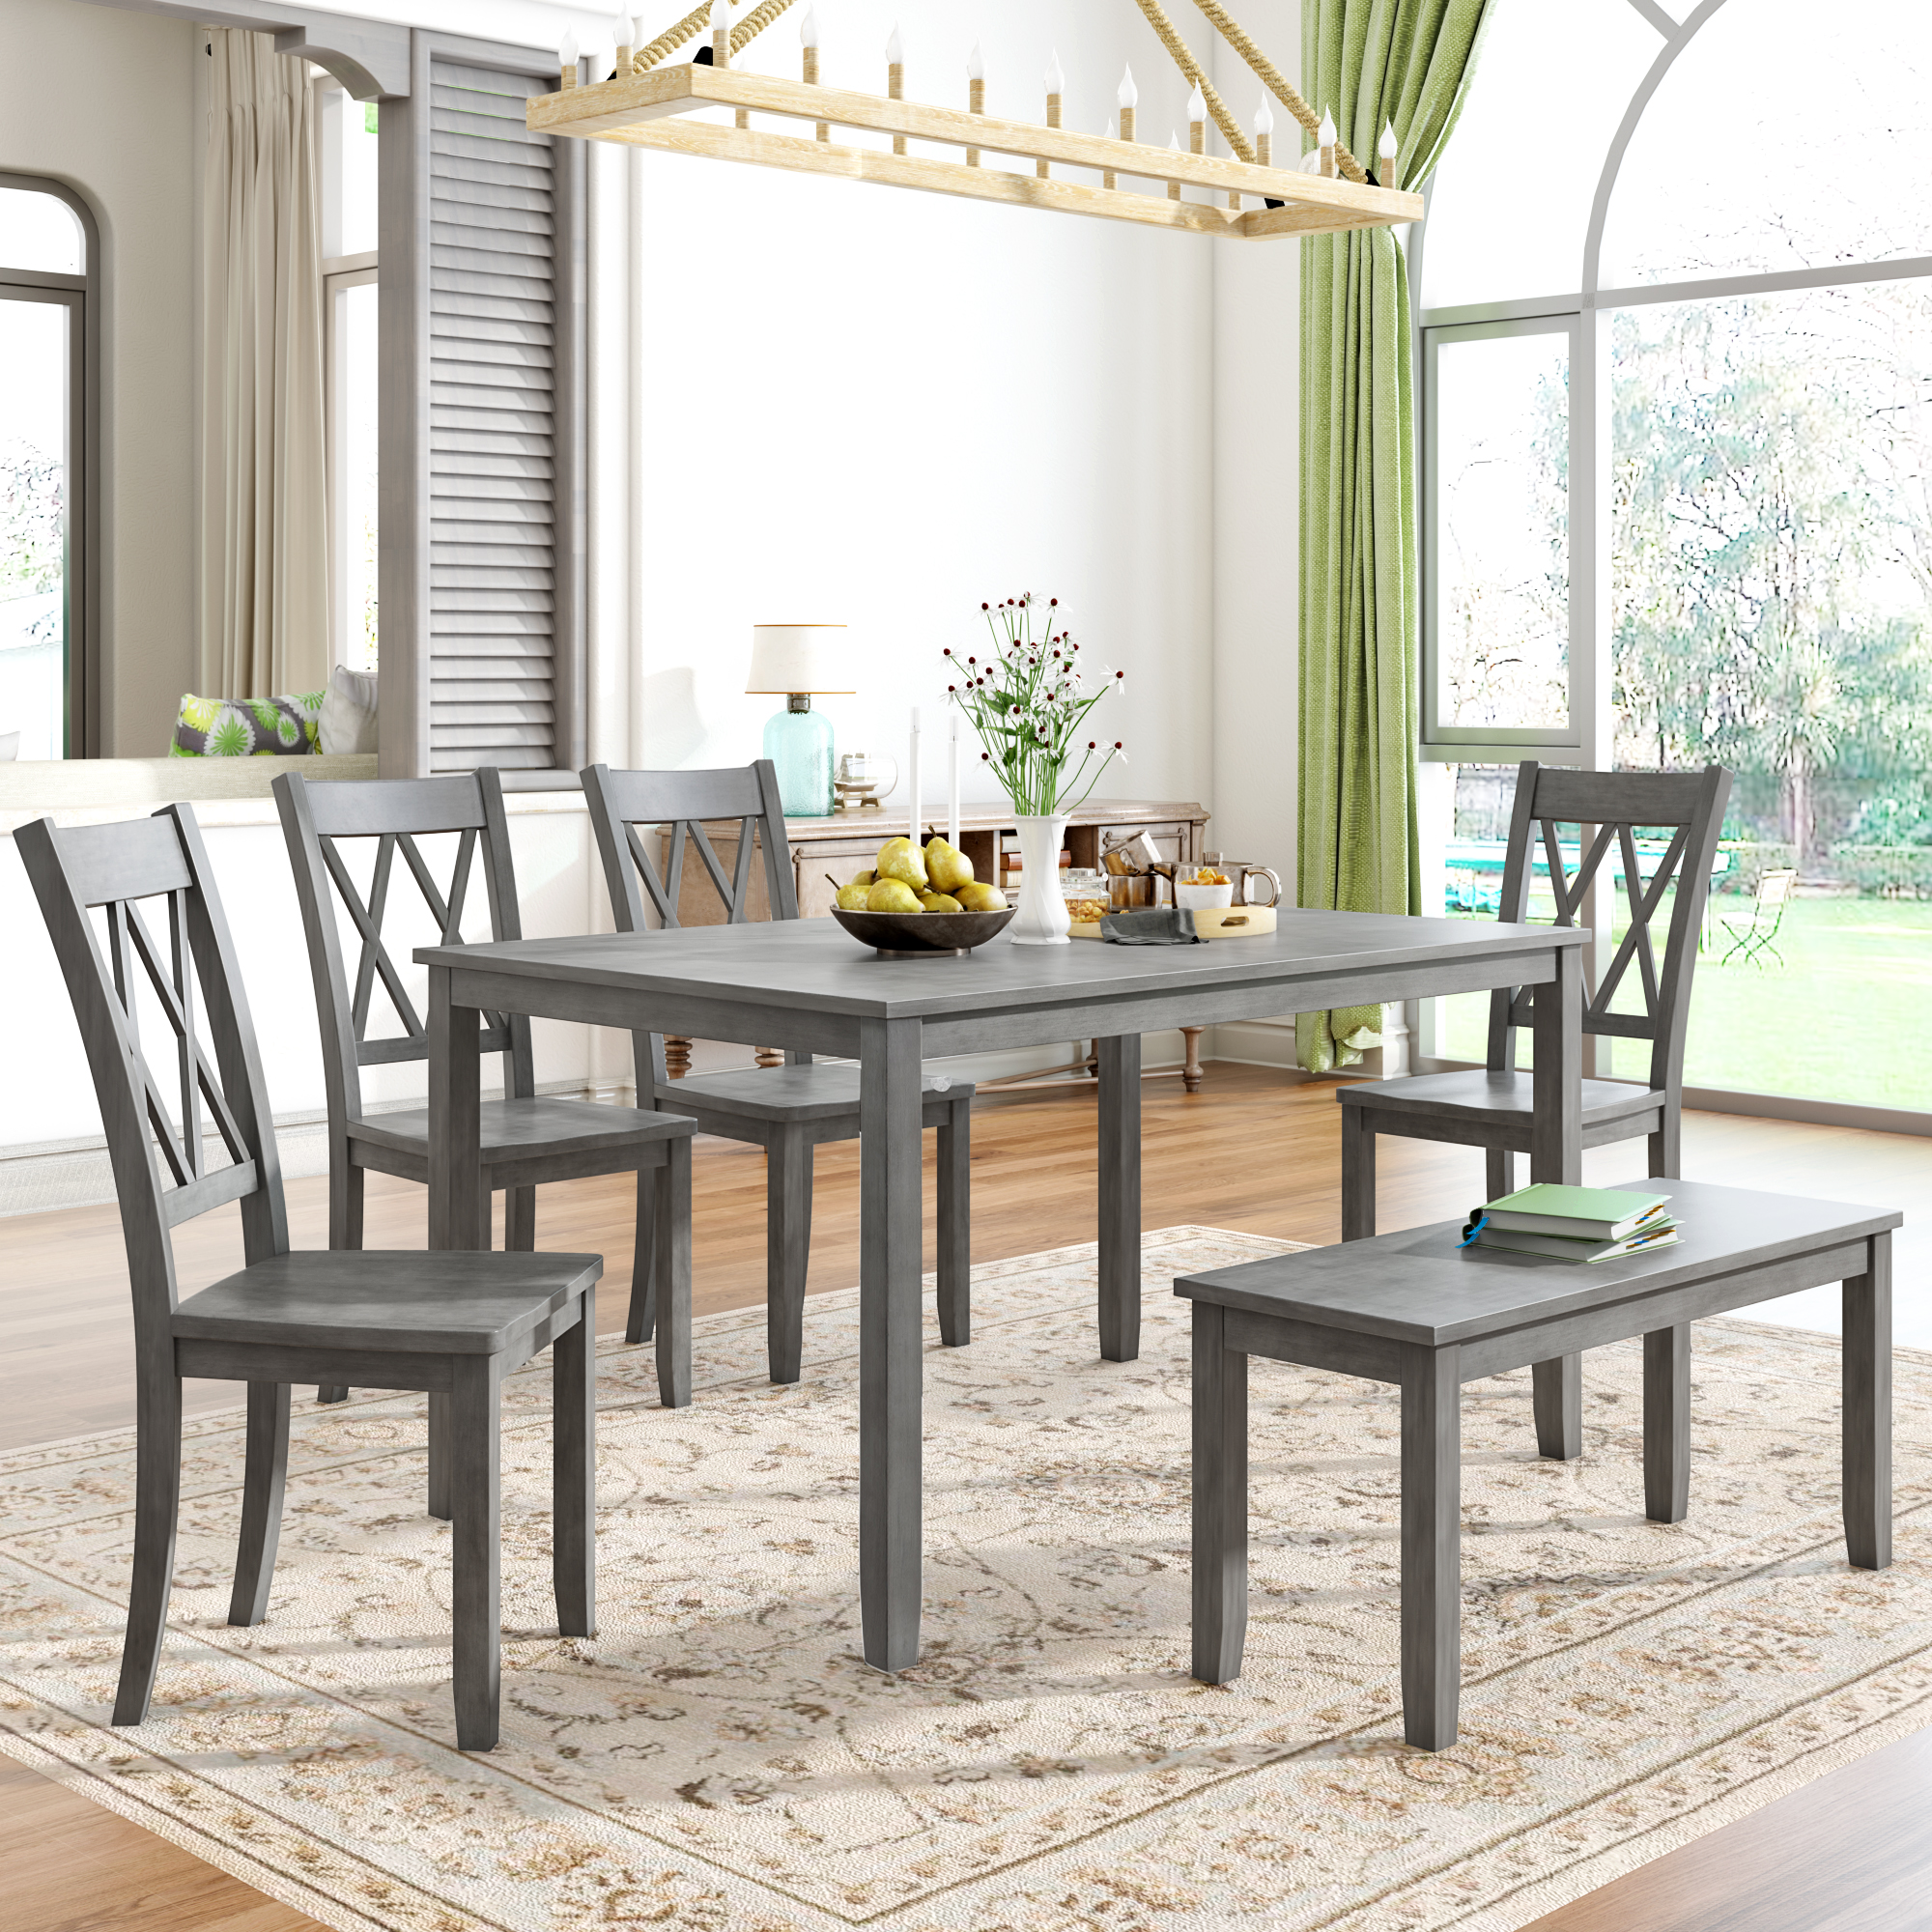 6-Piece Wooden Farmhouse Rustic Dining Table Set - SH000172AAE